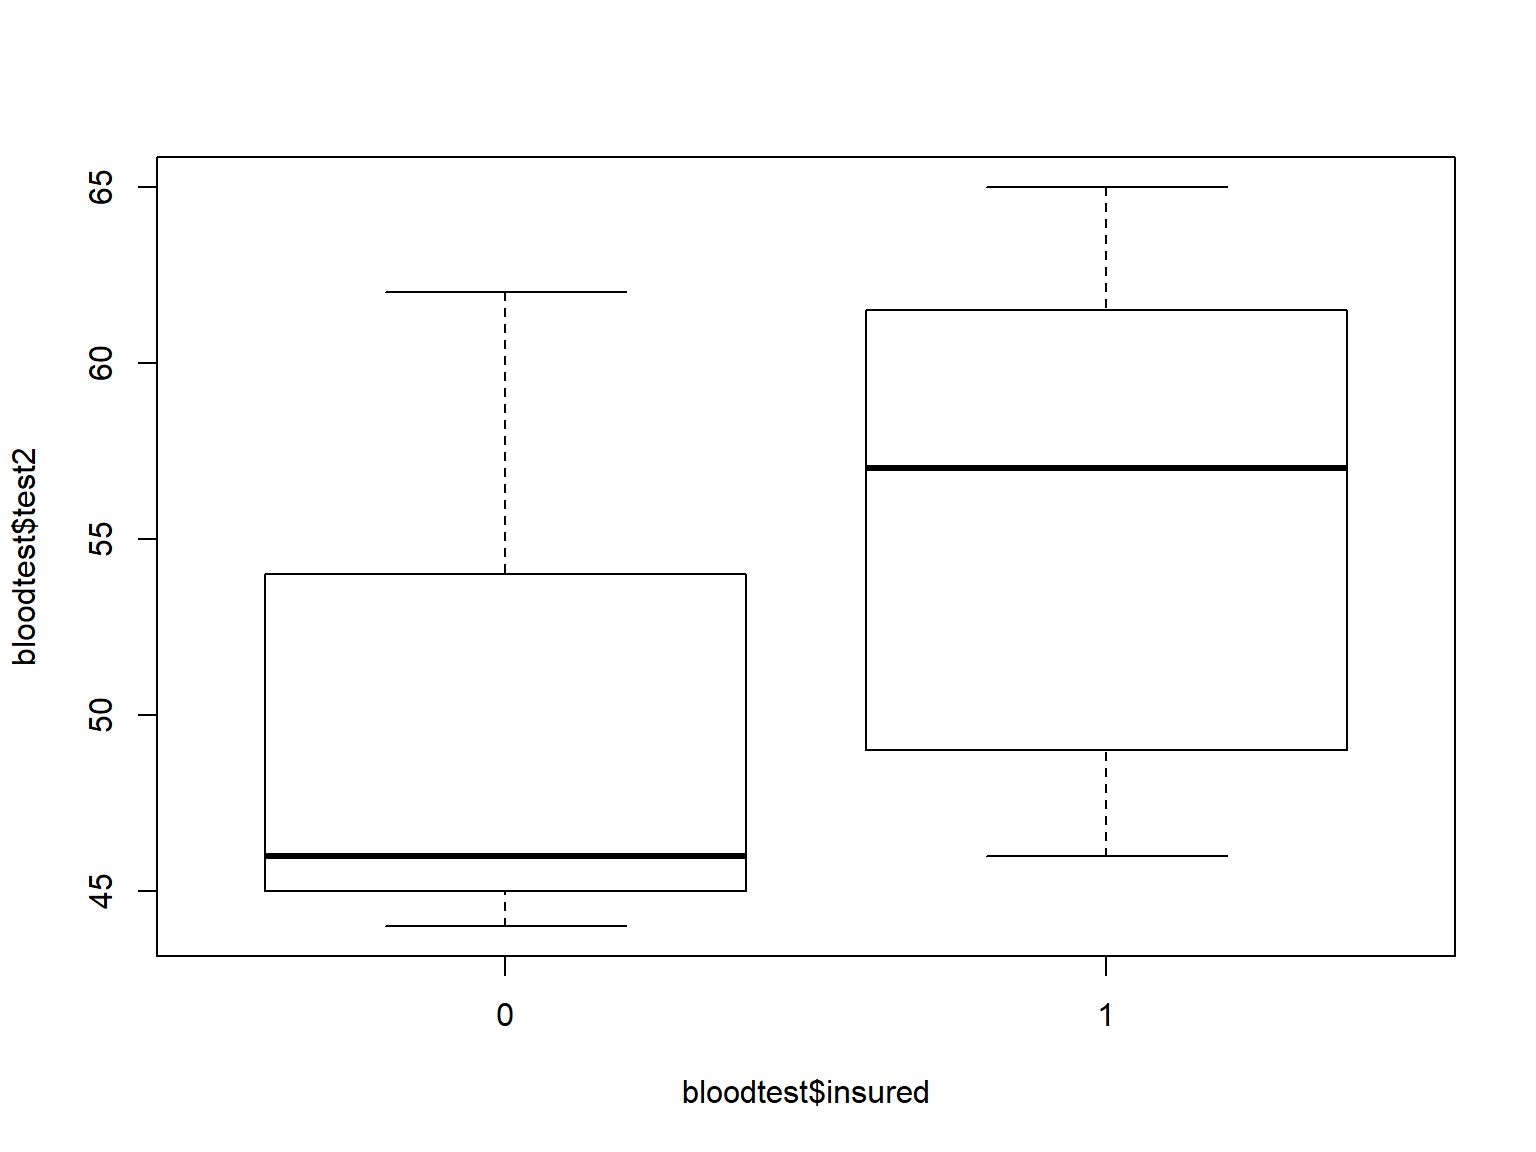 Fig 8. boxplots of test2 by insured